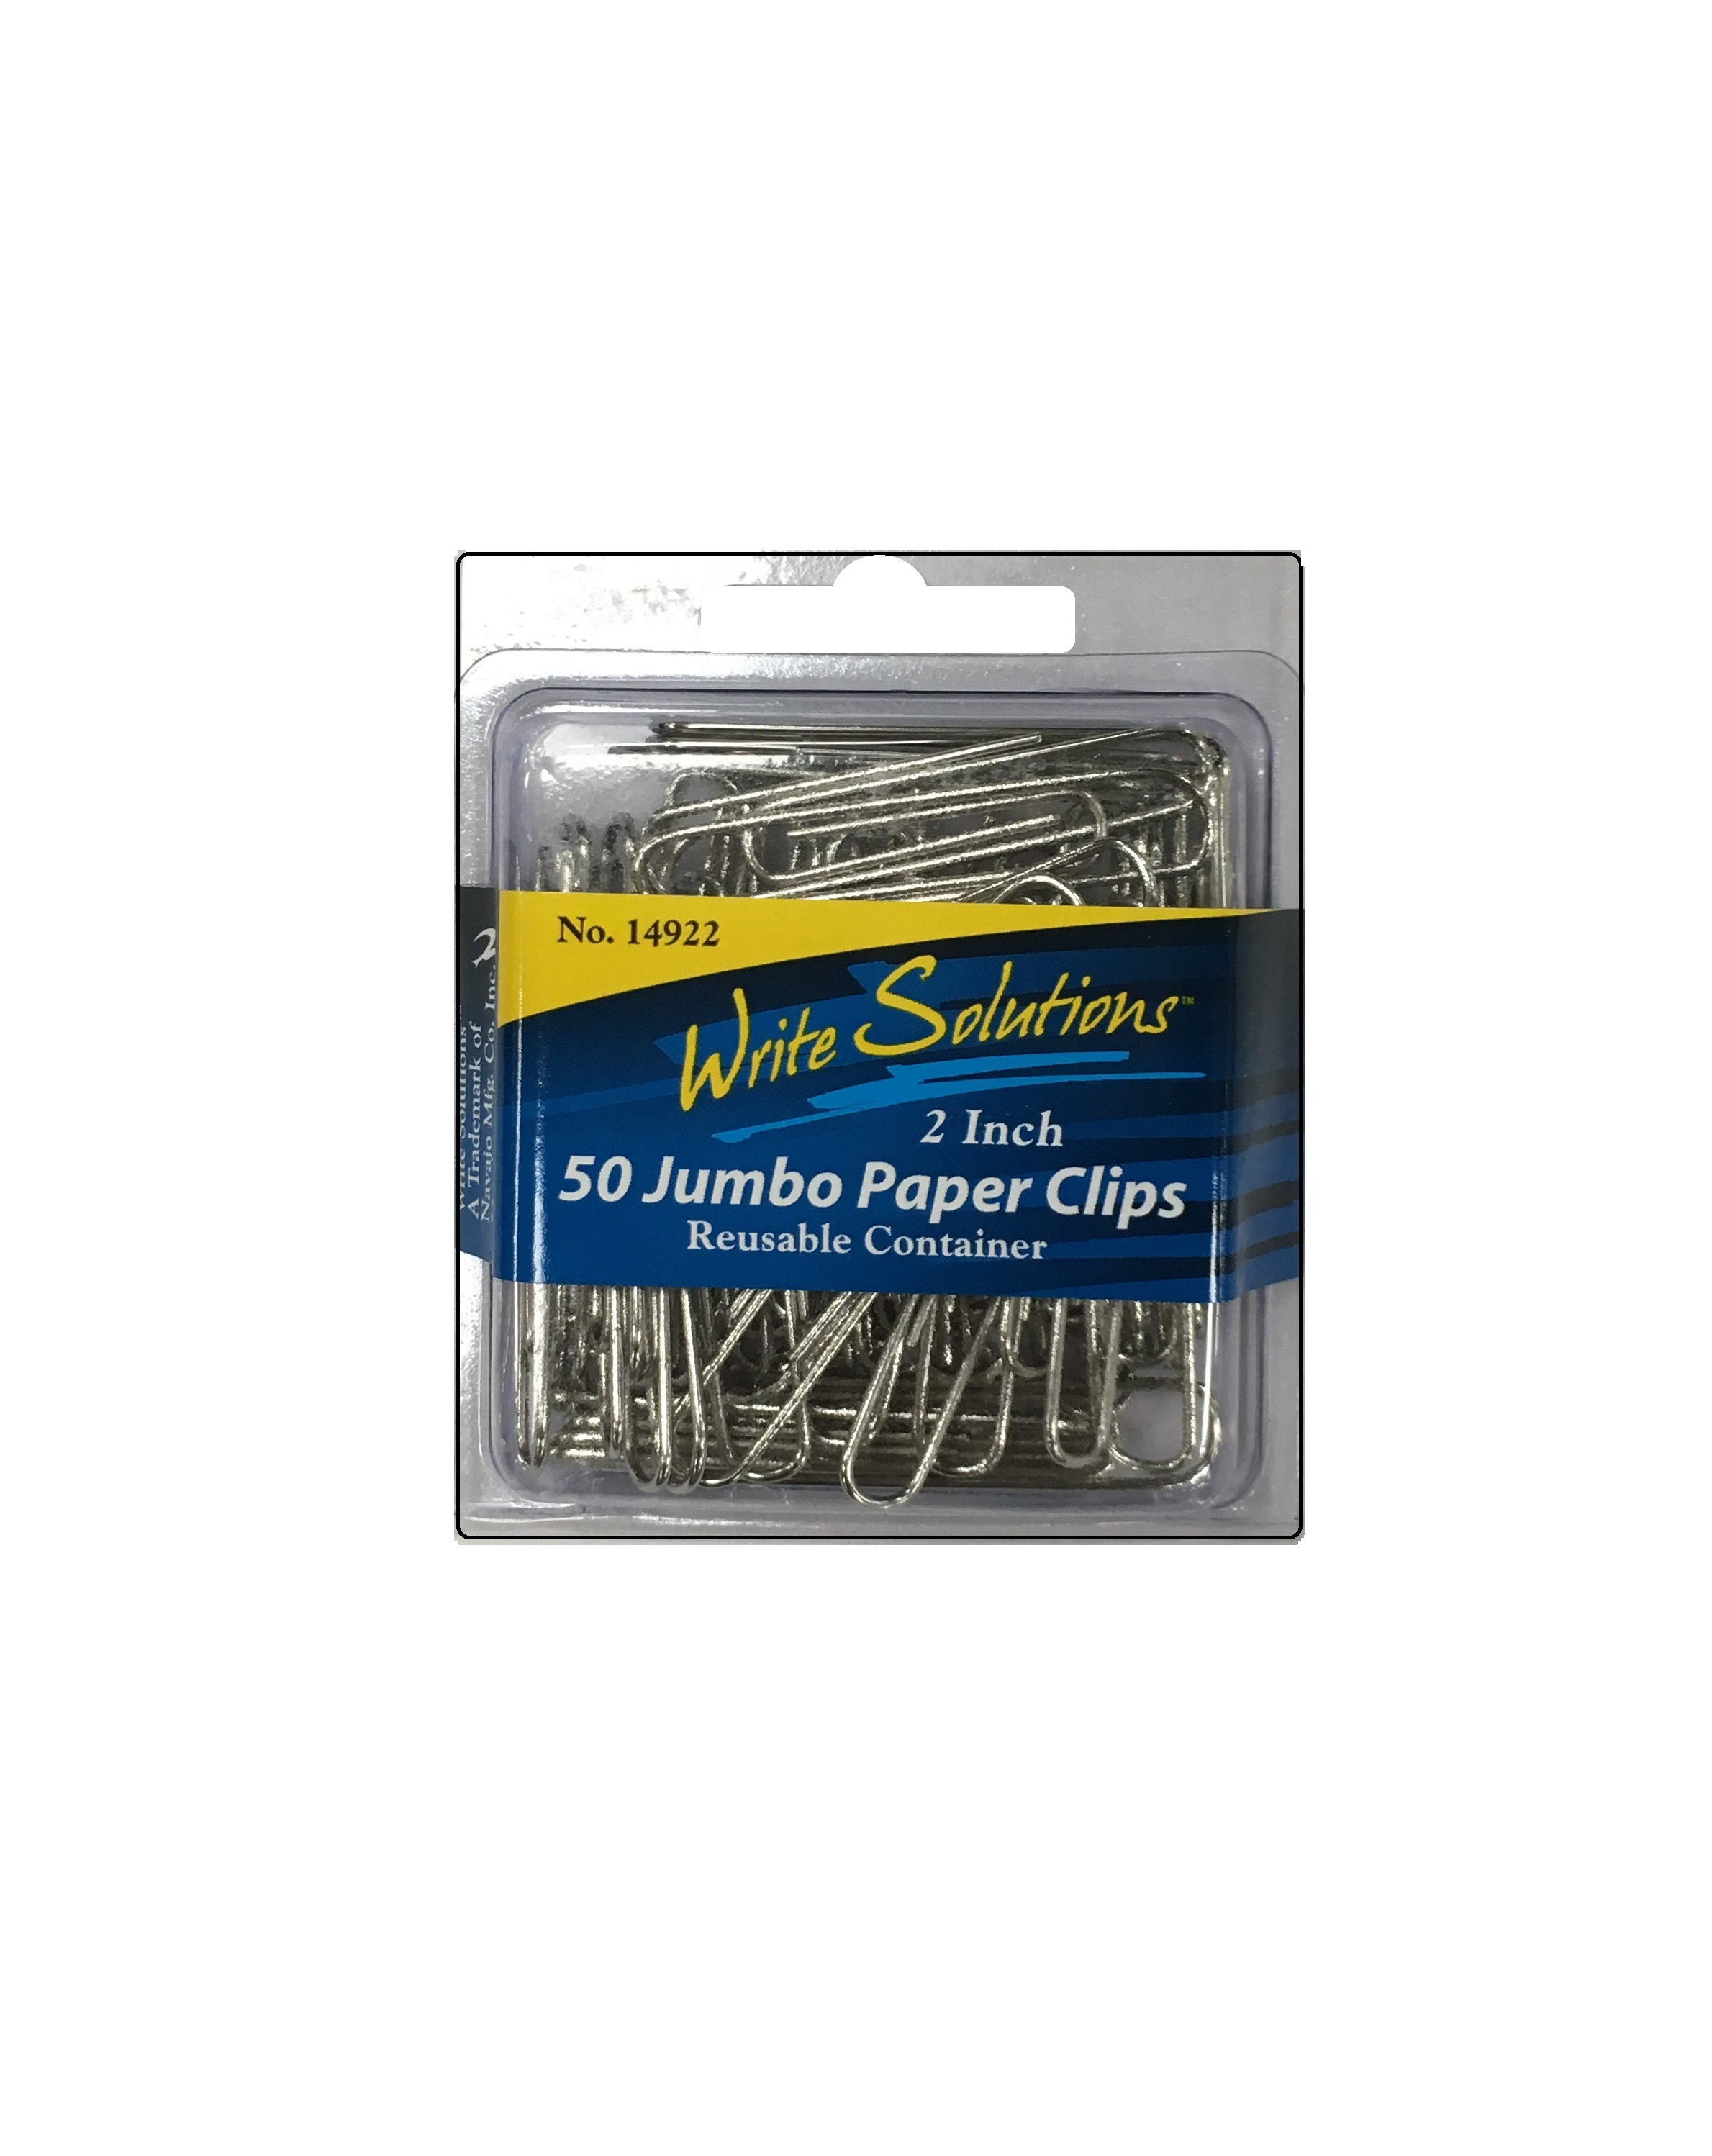 Write solution jumbo paper clips 50ct